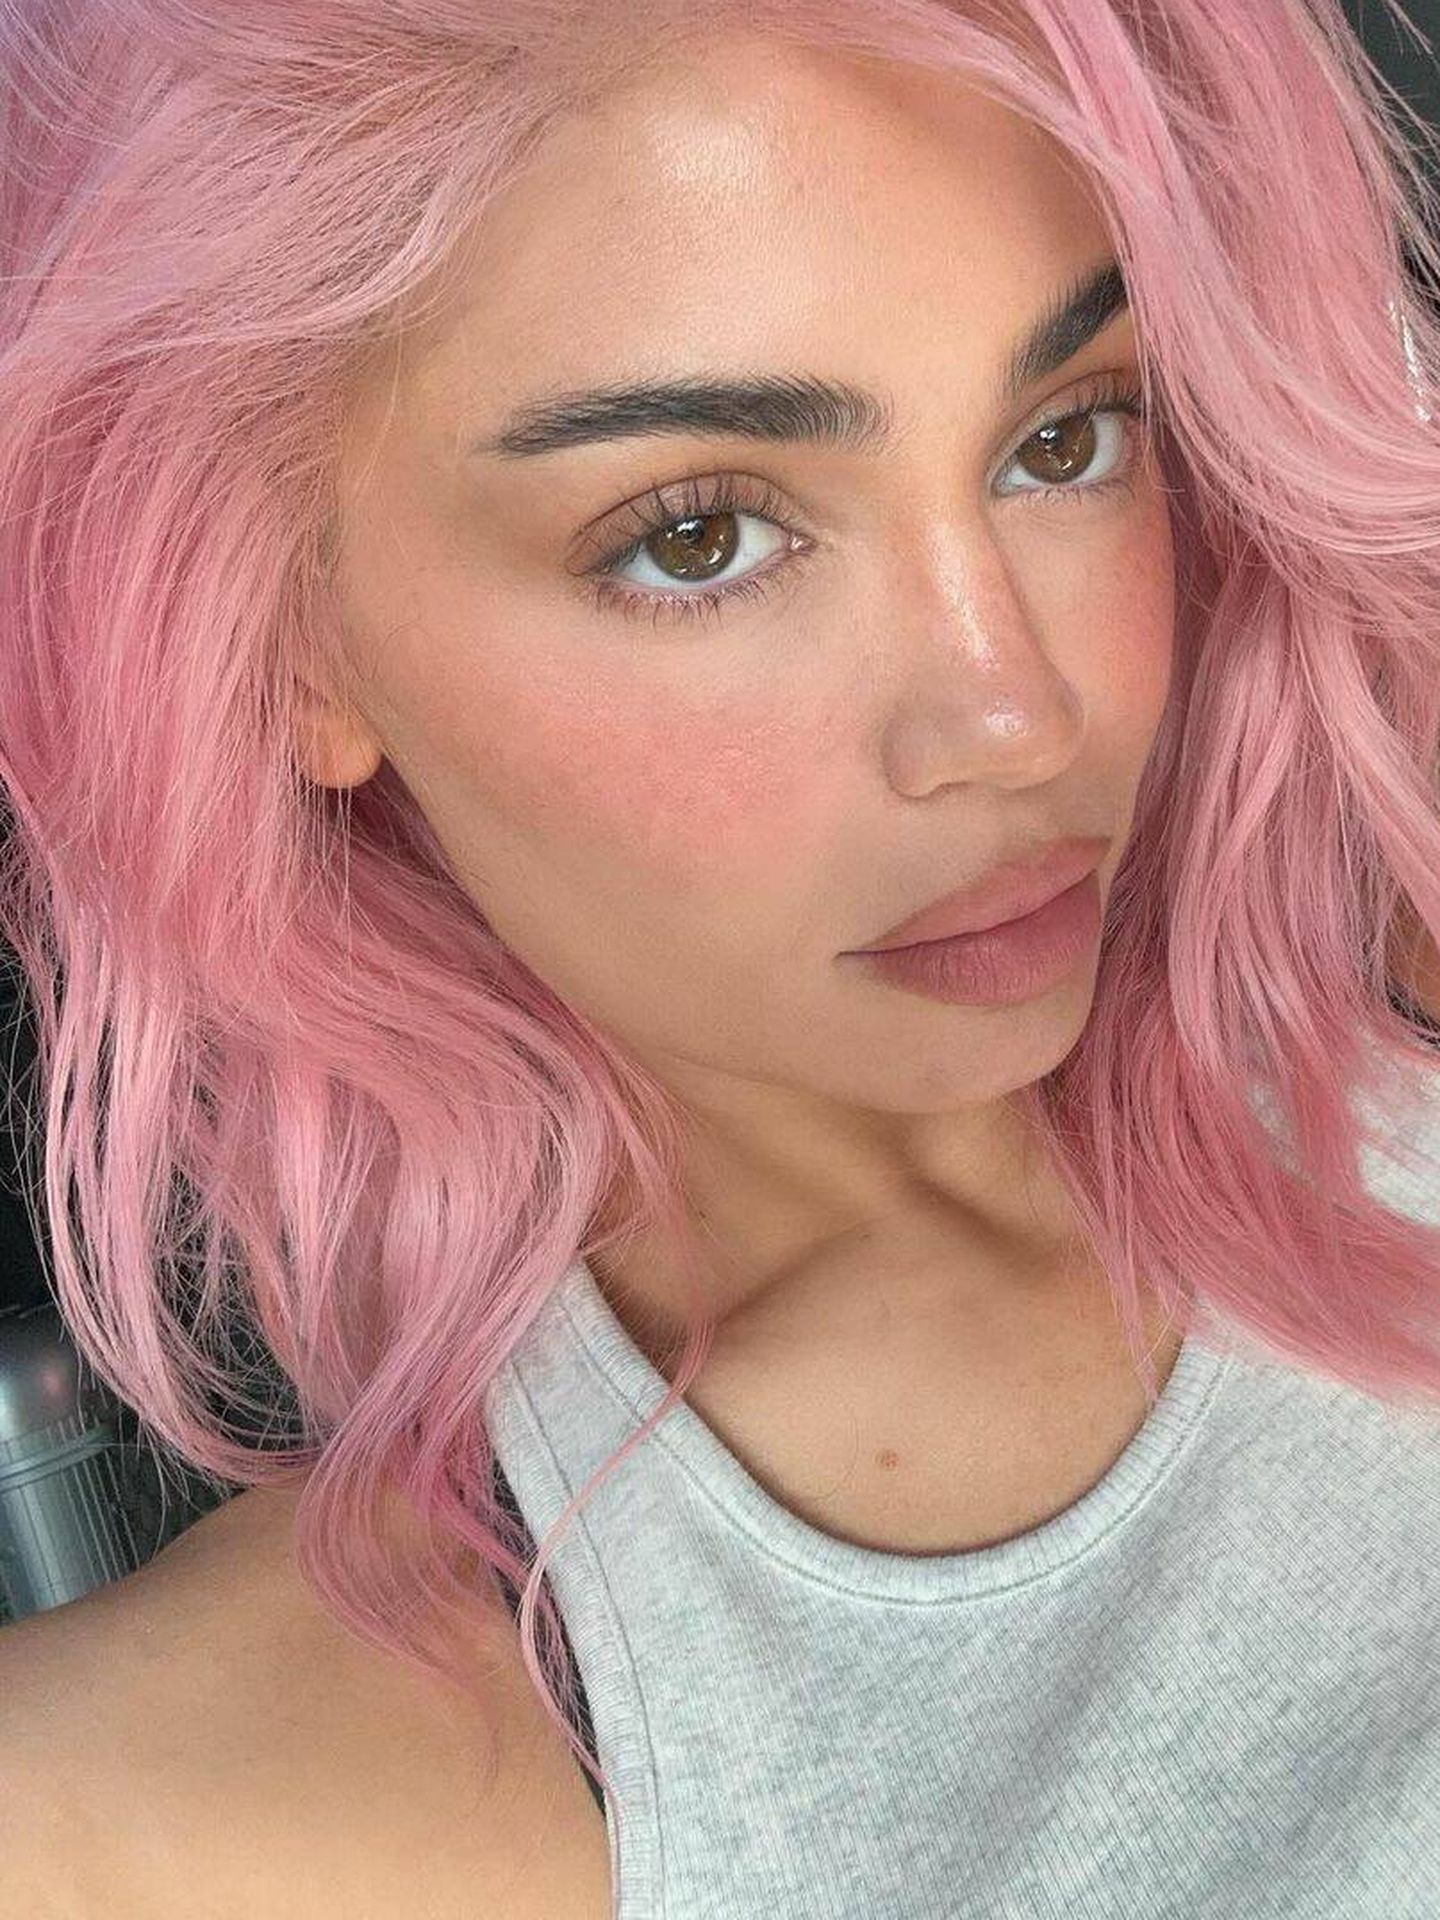 Kylie Jenner con su coloración rosa chicle. (Instagram/@kyliejenner)